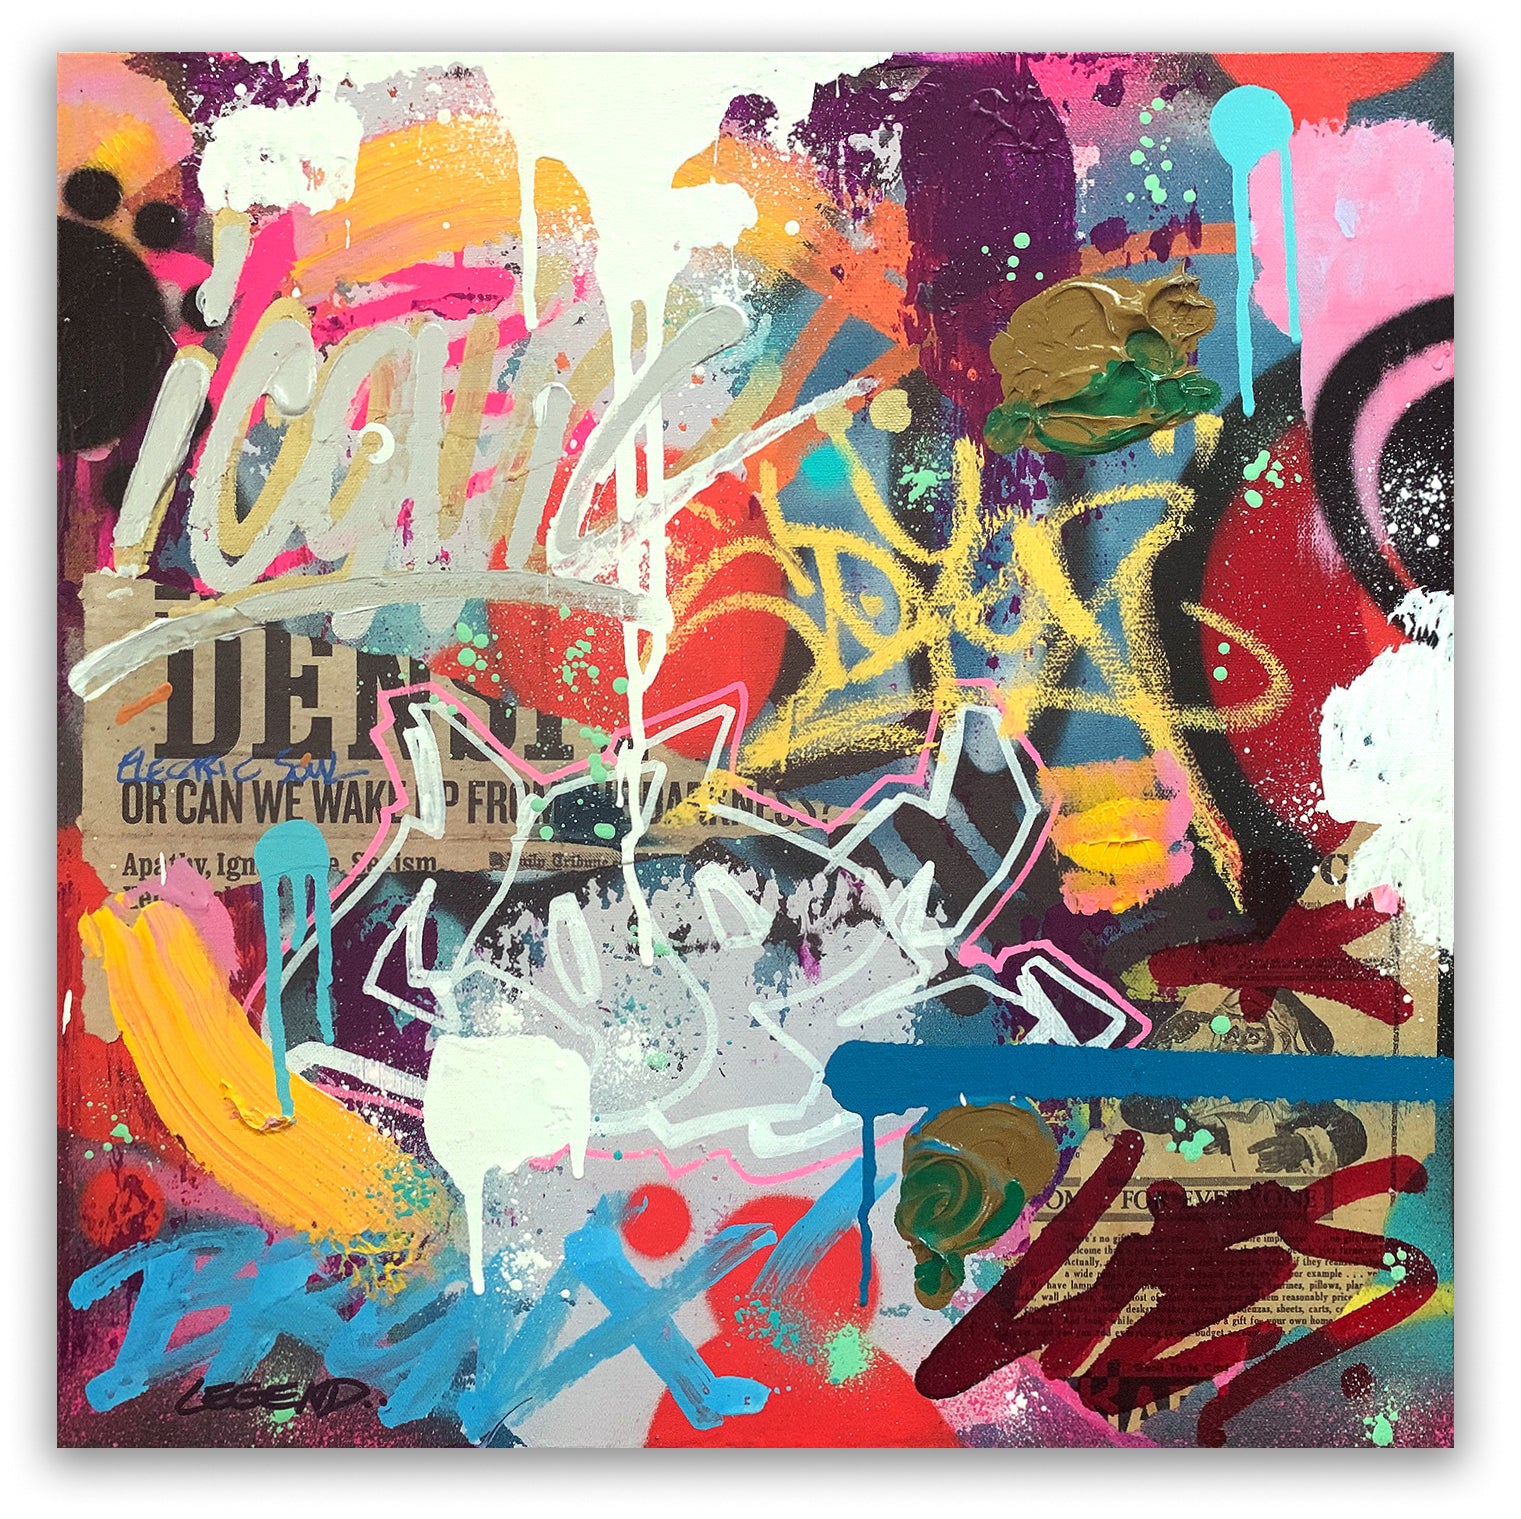 COPE2 "BX Lies" 20"x20" Painting